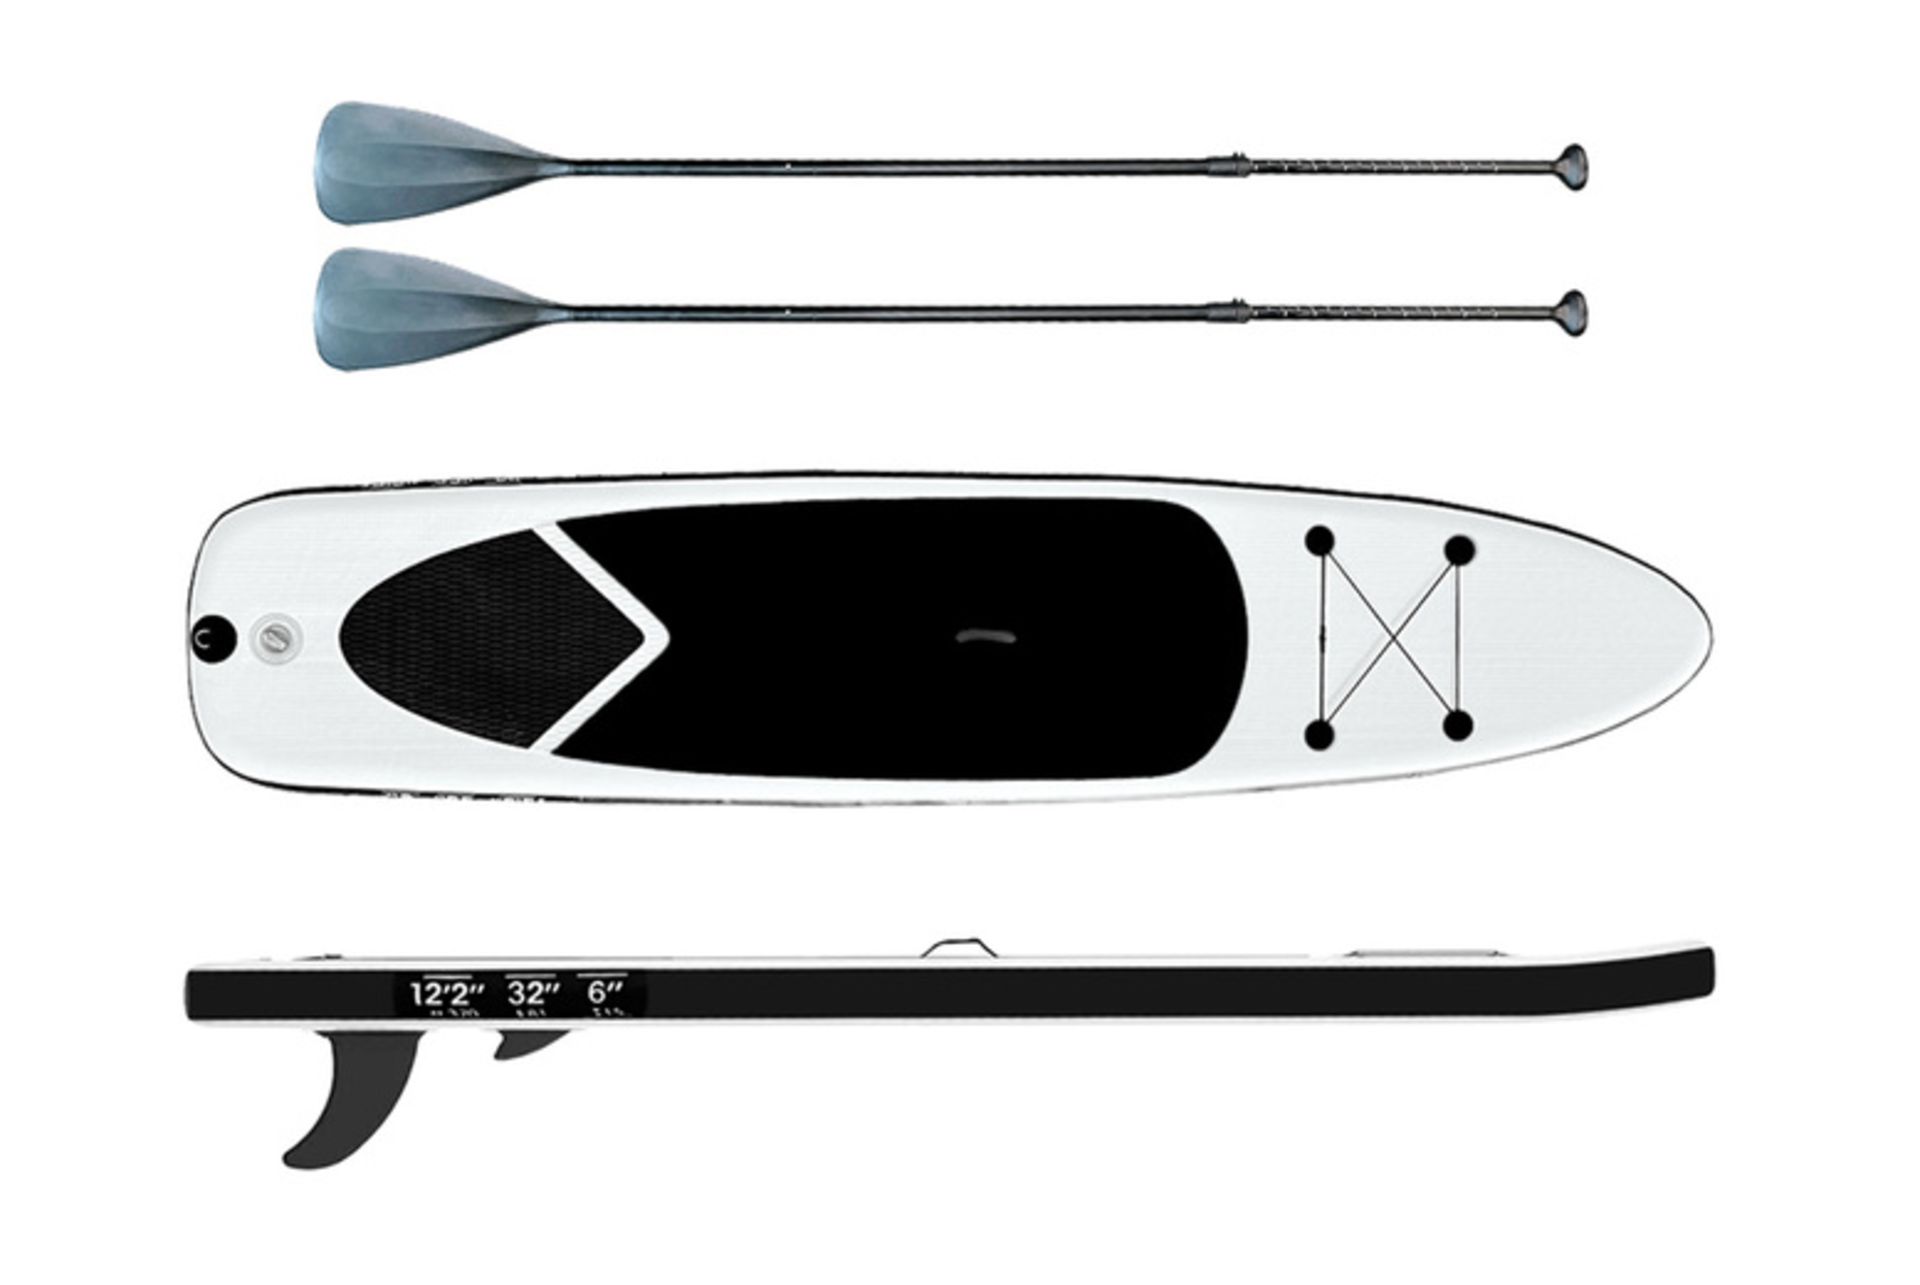 FREE DELIVERY - JOBLOT OF 5 X LARGE 2-PERSON INFLATABLE PADDLE BOARD W/ ACCESSORIES - BLACK